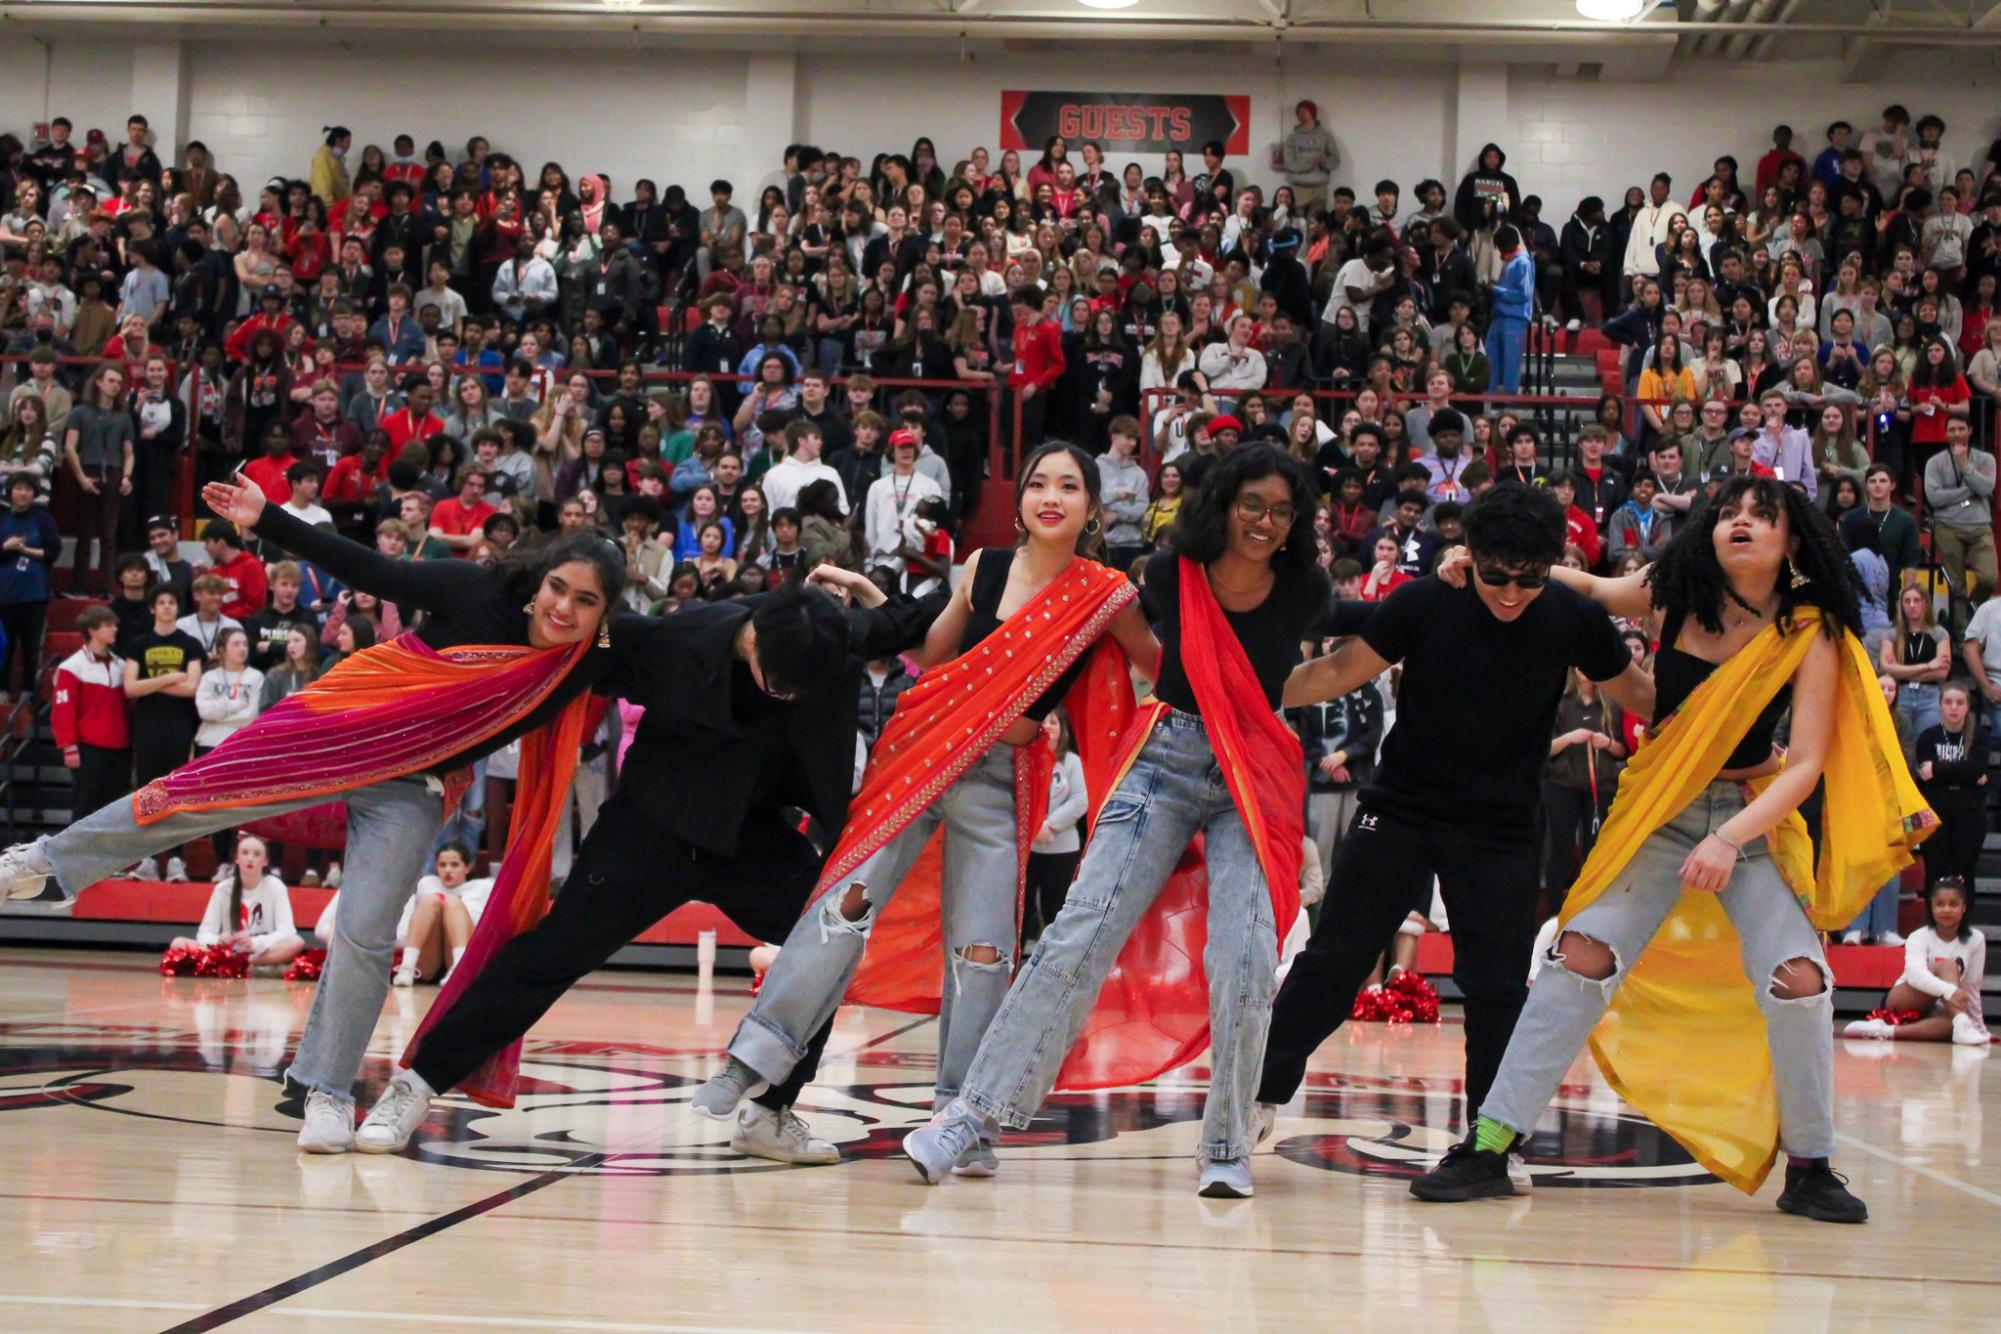 The Bollywood Dance team performing their routine. Photo by Lydia Adams